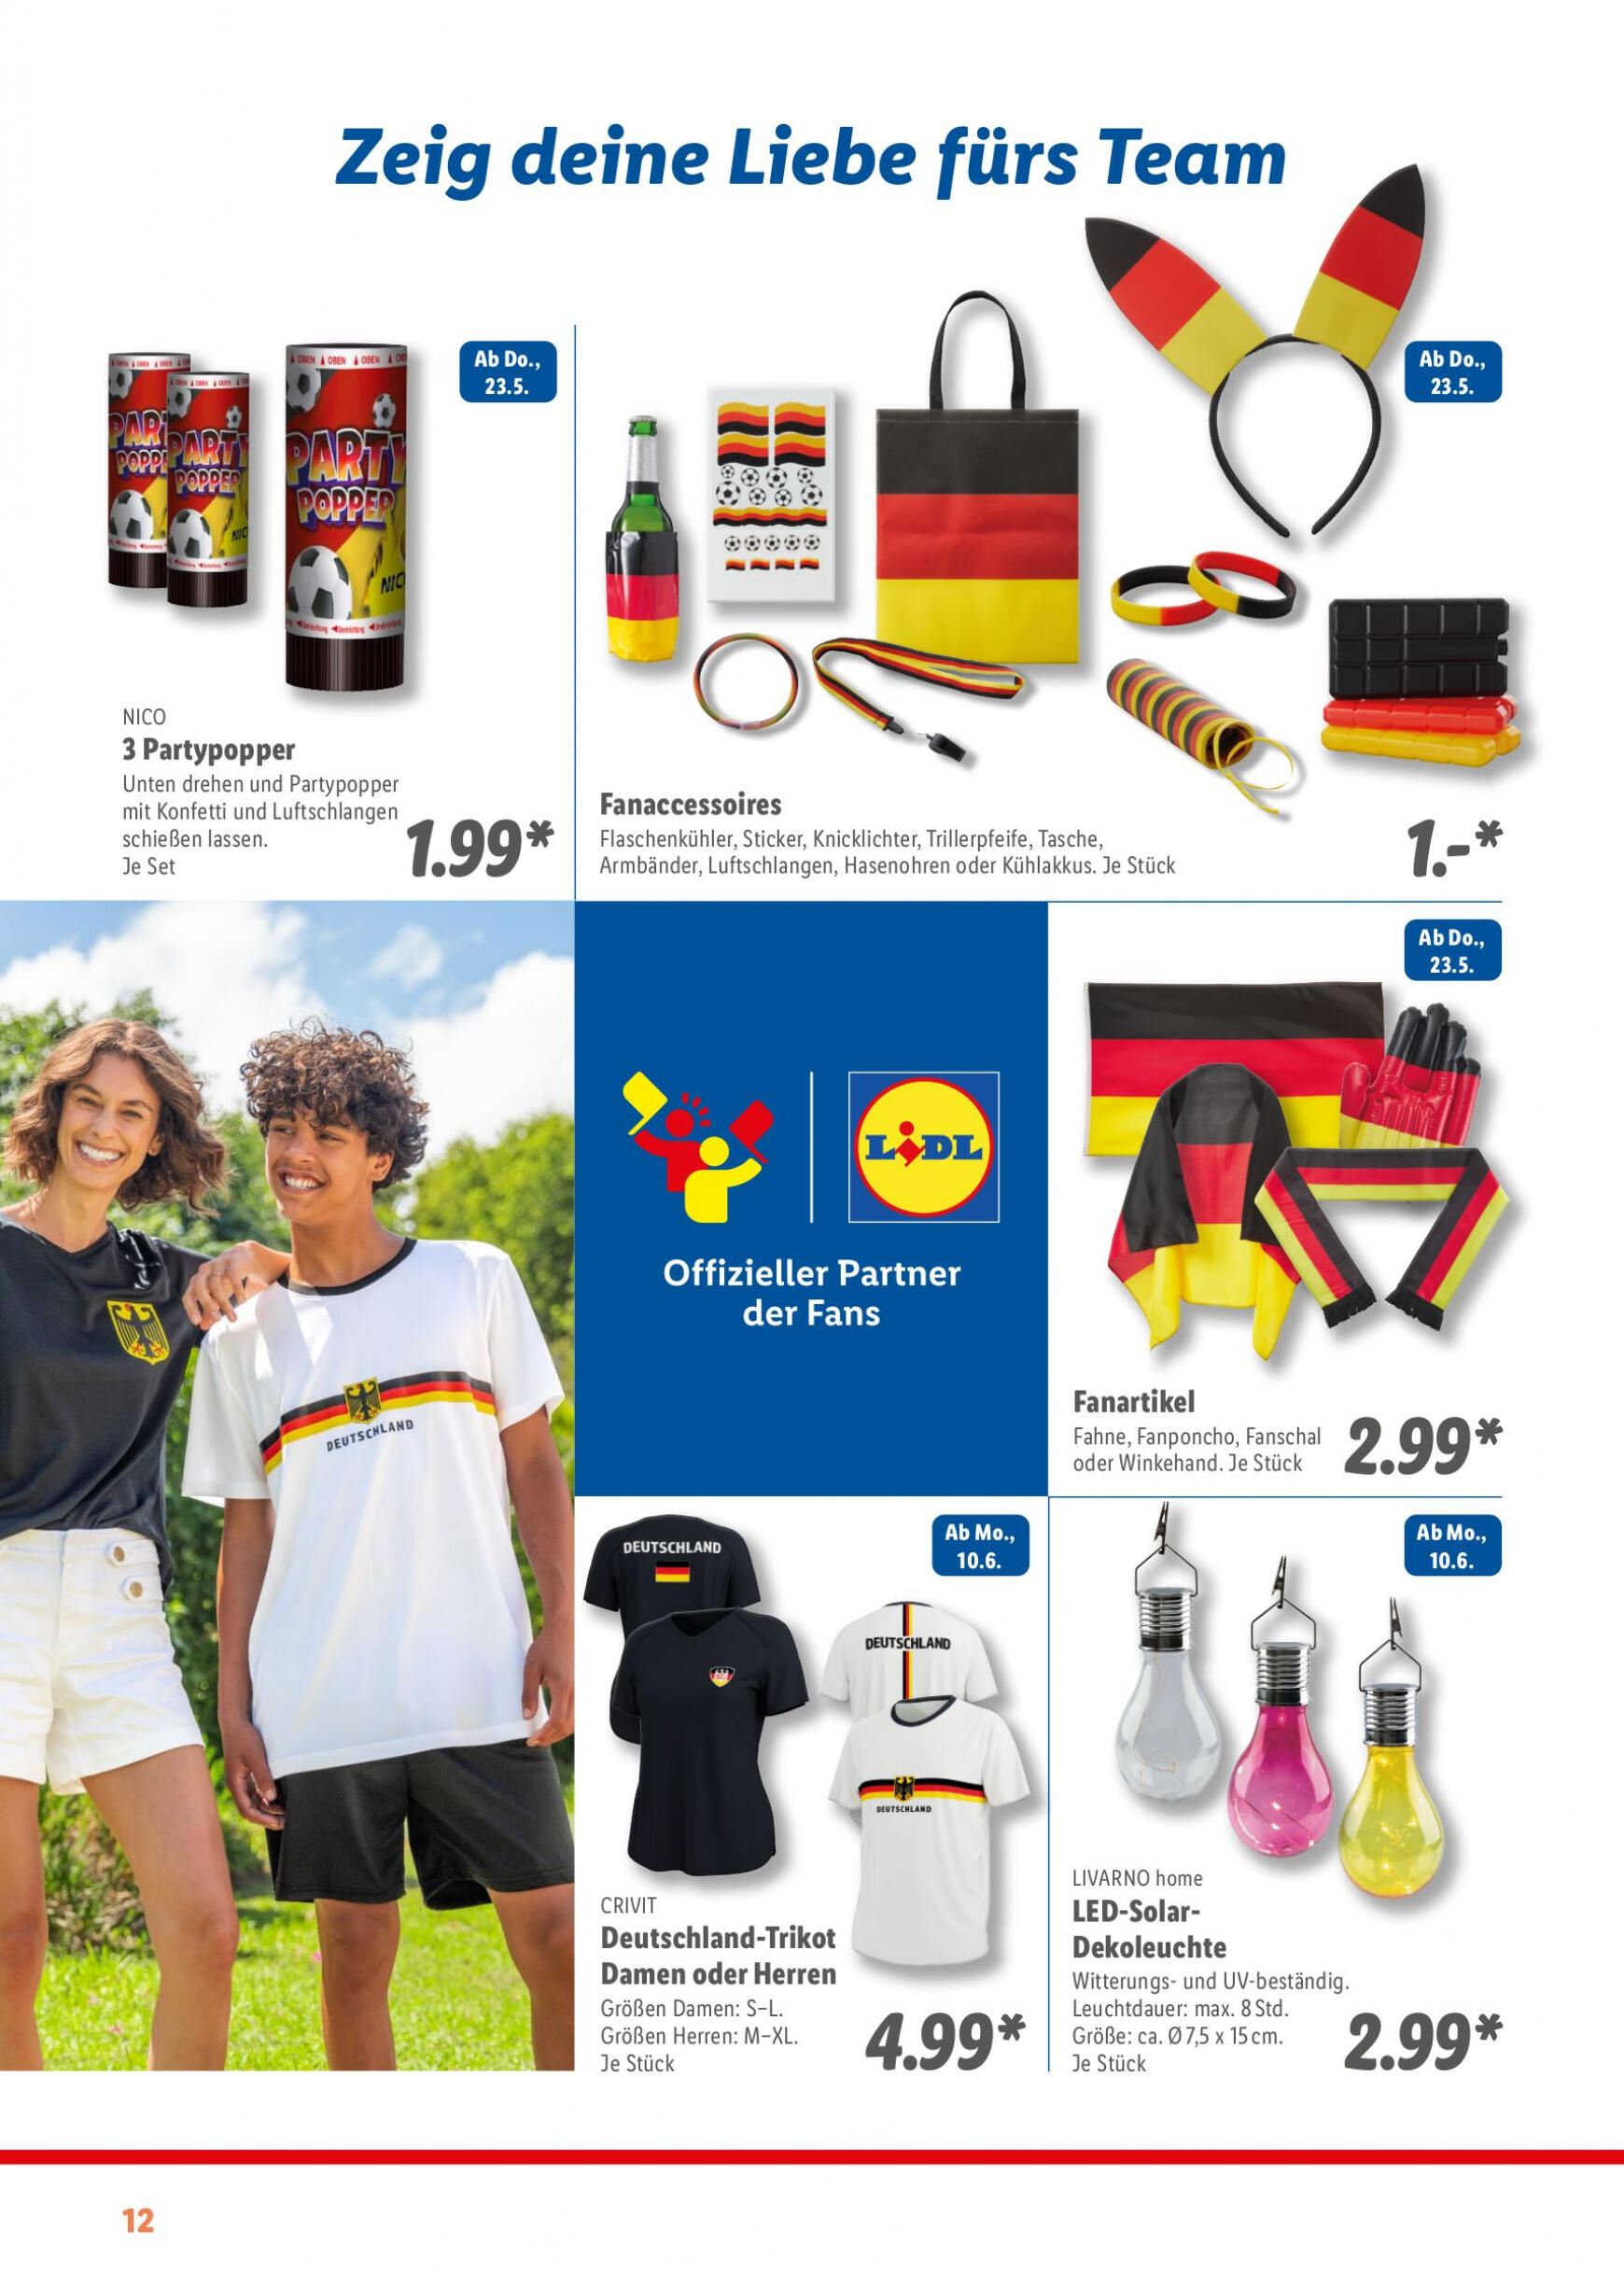 lidl - Flyer Lidl - aktuell 13.05. - 16.06. - page: 12